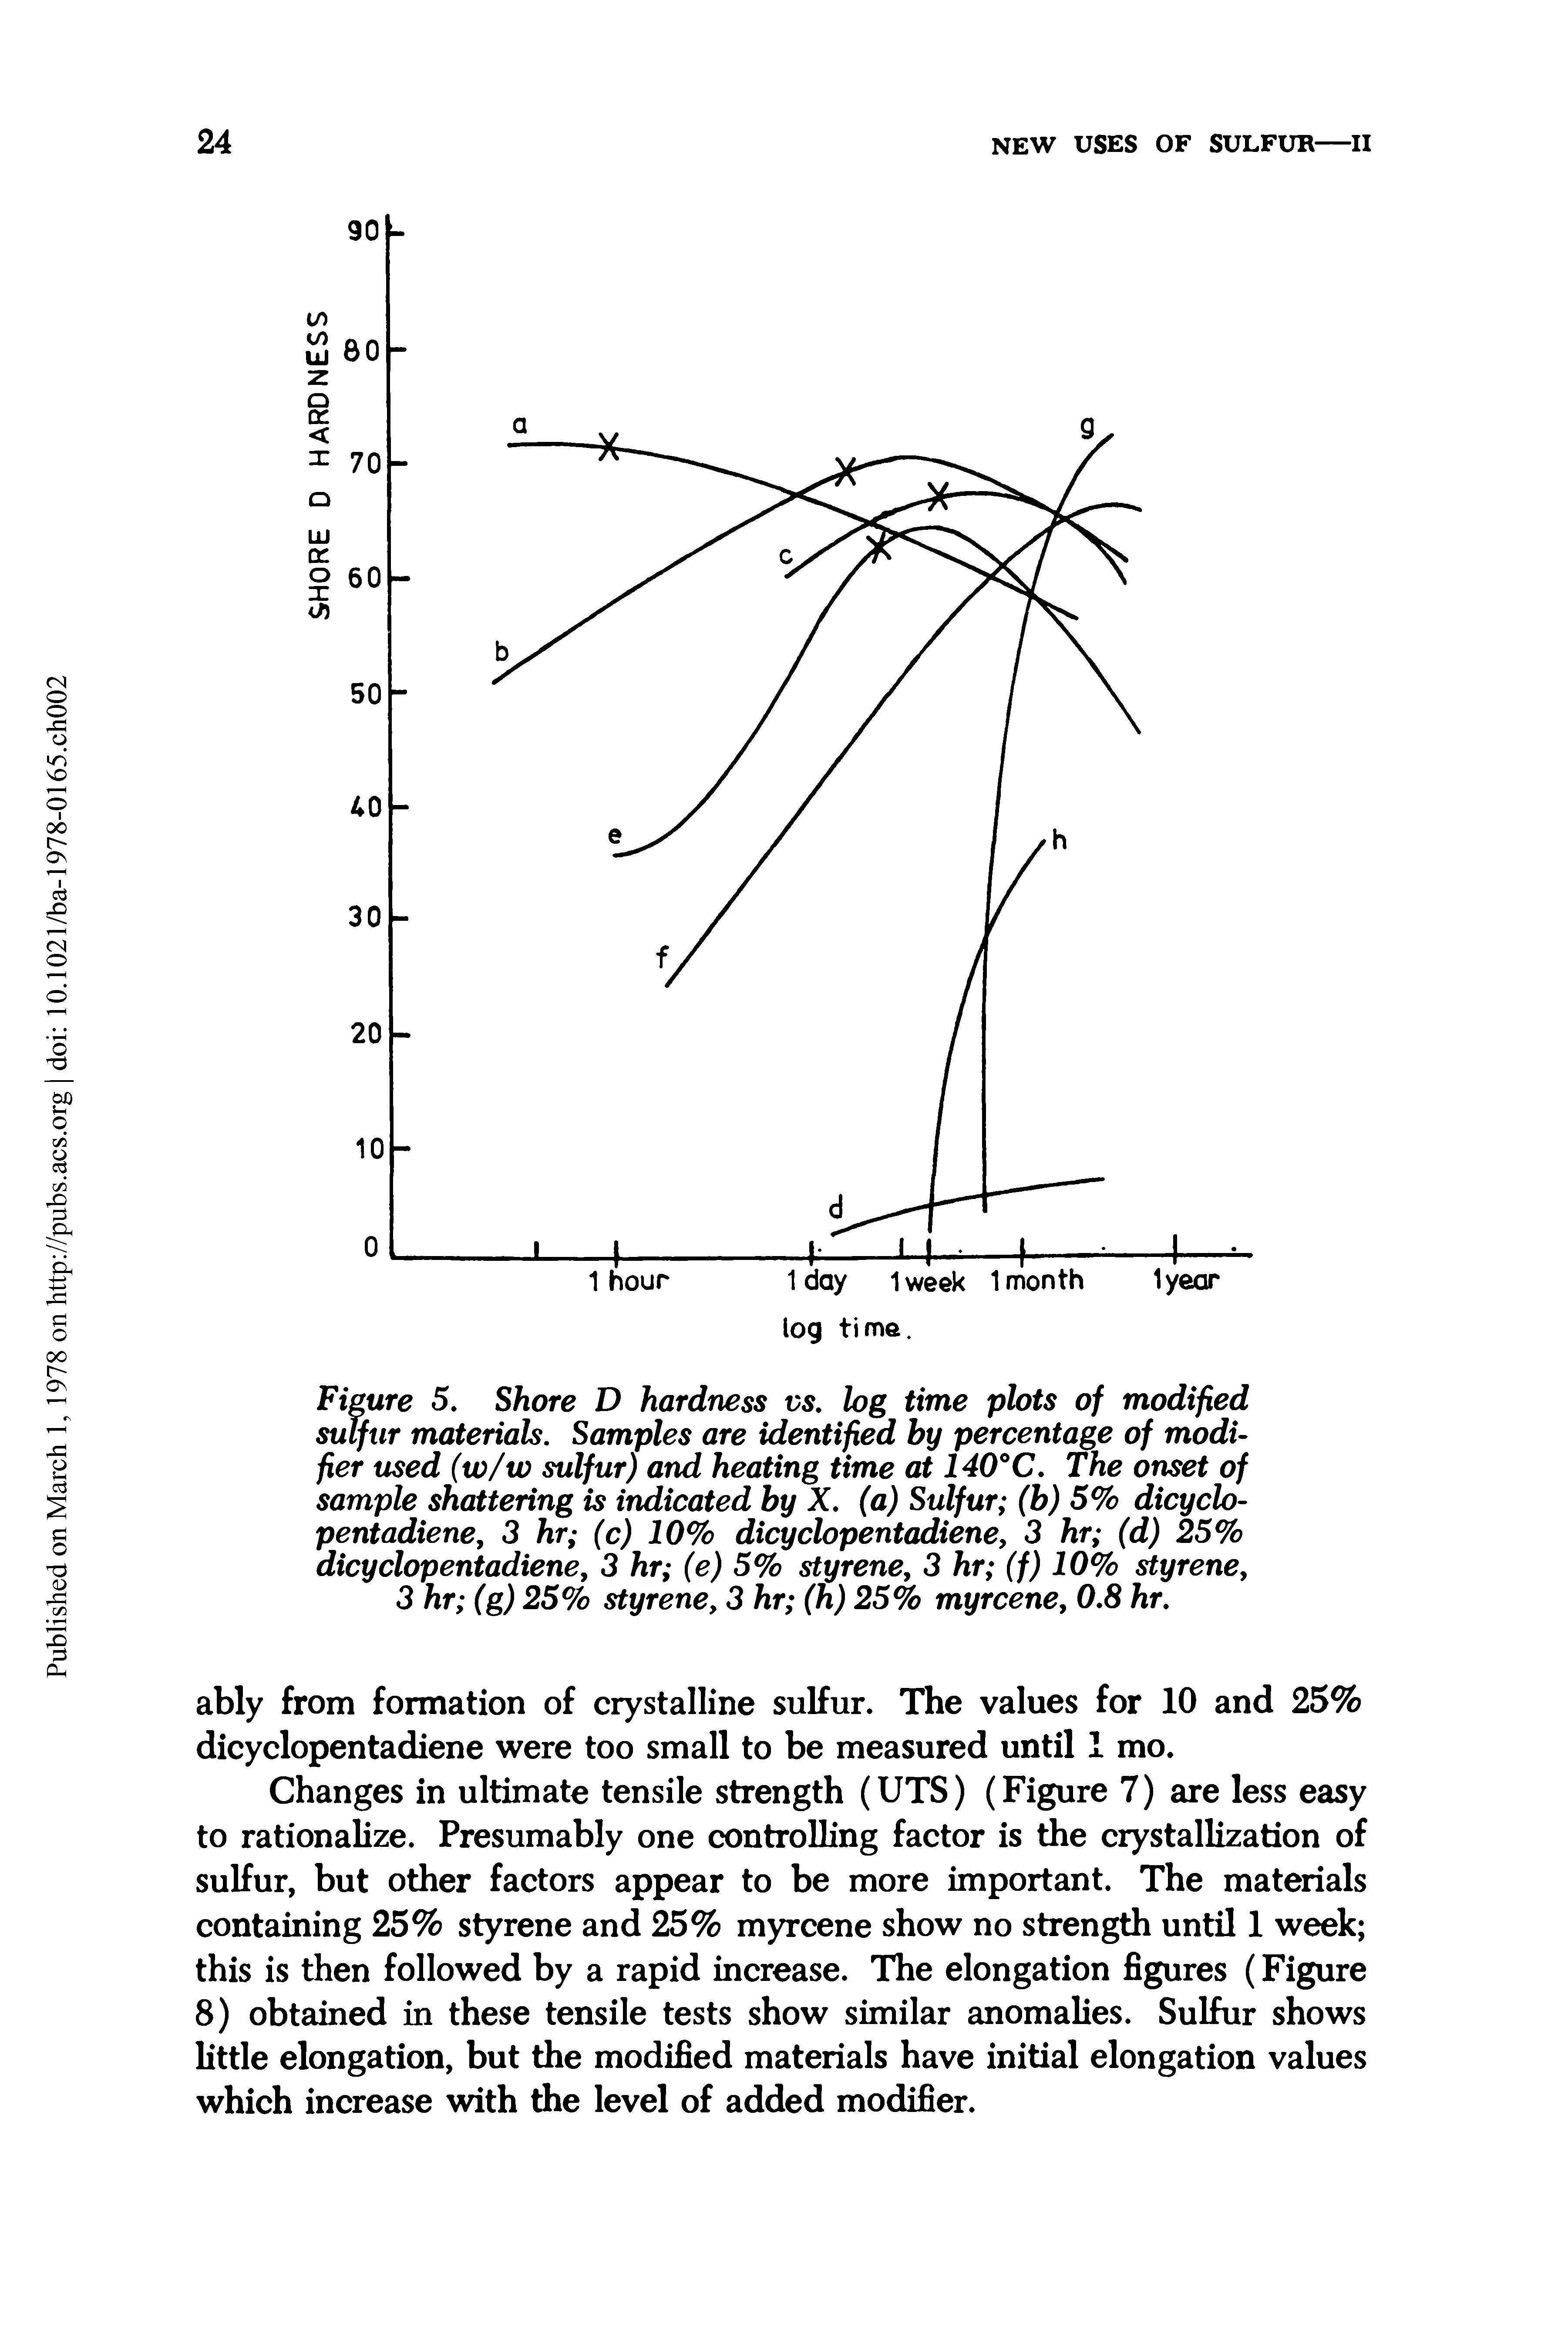 Figure 5. Shore D hardness vs. log time plots of modified sulfur materials. Samples are identified by percentage of modifier used (w/w sulfur) and heating time at 140°C. The onset of sample shattering is indicated by X. (a) Sulfur (b) 5% dicyclo-pentadiene, 3 hr (c) 10% dicyclopentadiene, 3 hr (d) 25% dicyclopentadiene, 3 hr (e) 5% styrene, 3 hr (f) 10% styrene, 3 hr (g) 25% styrene, 3 hr (h) 25% myrcene, 0.8 hr.